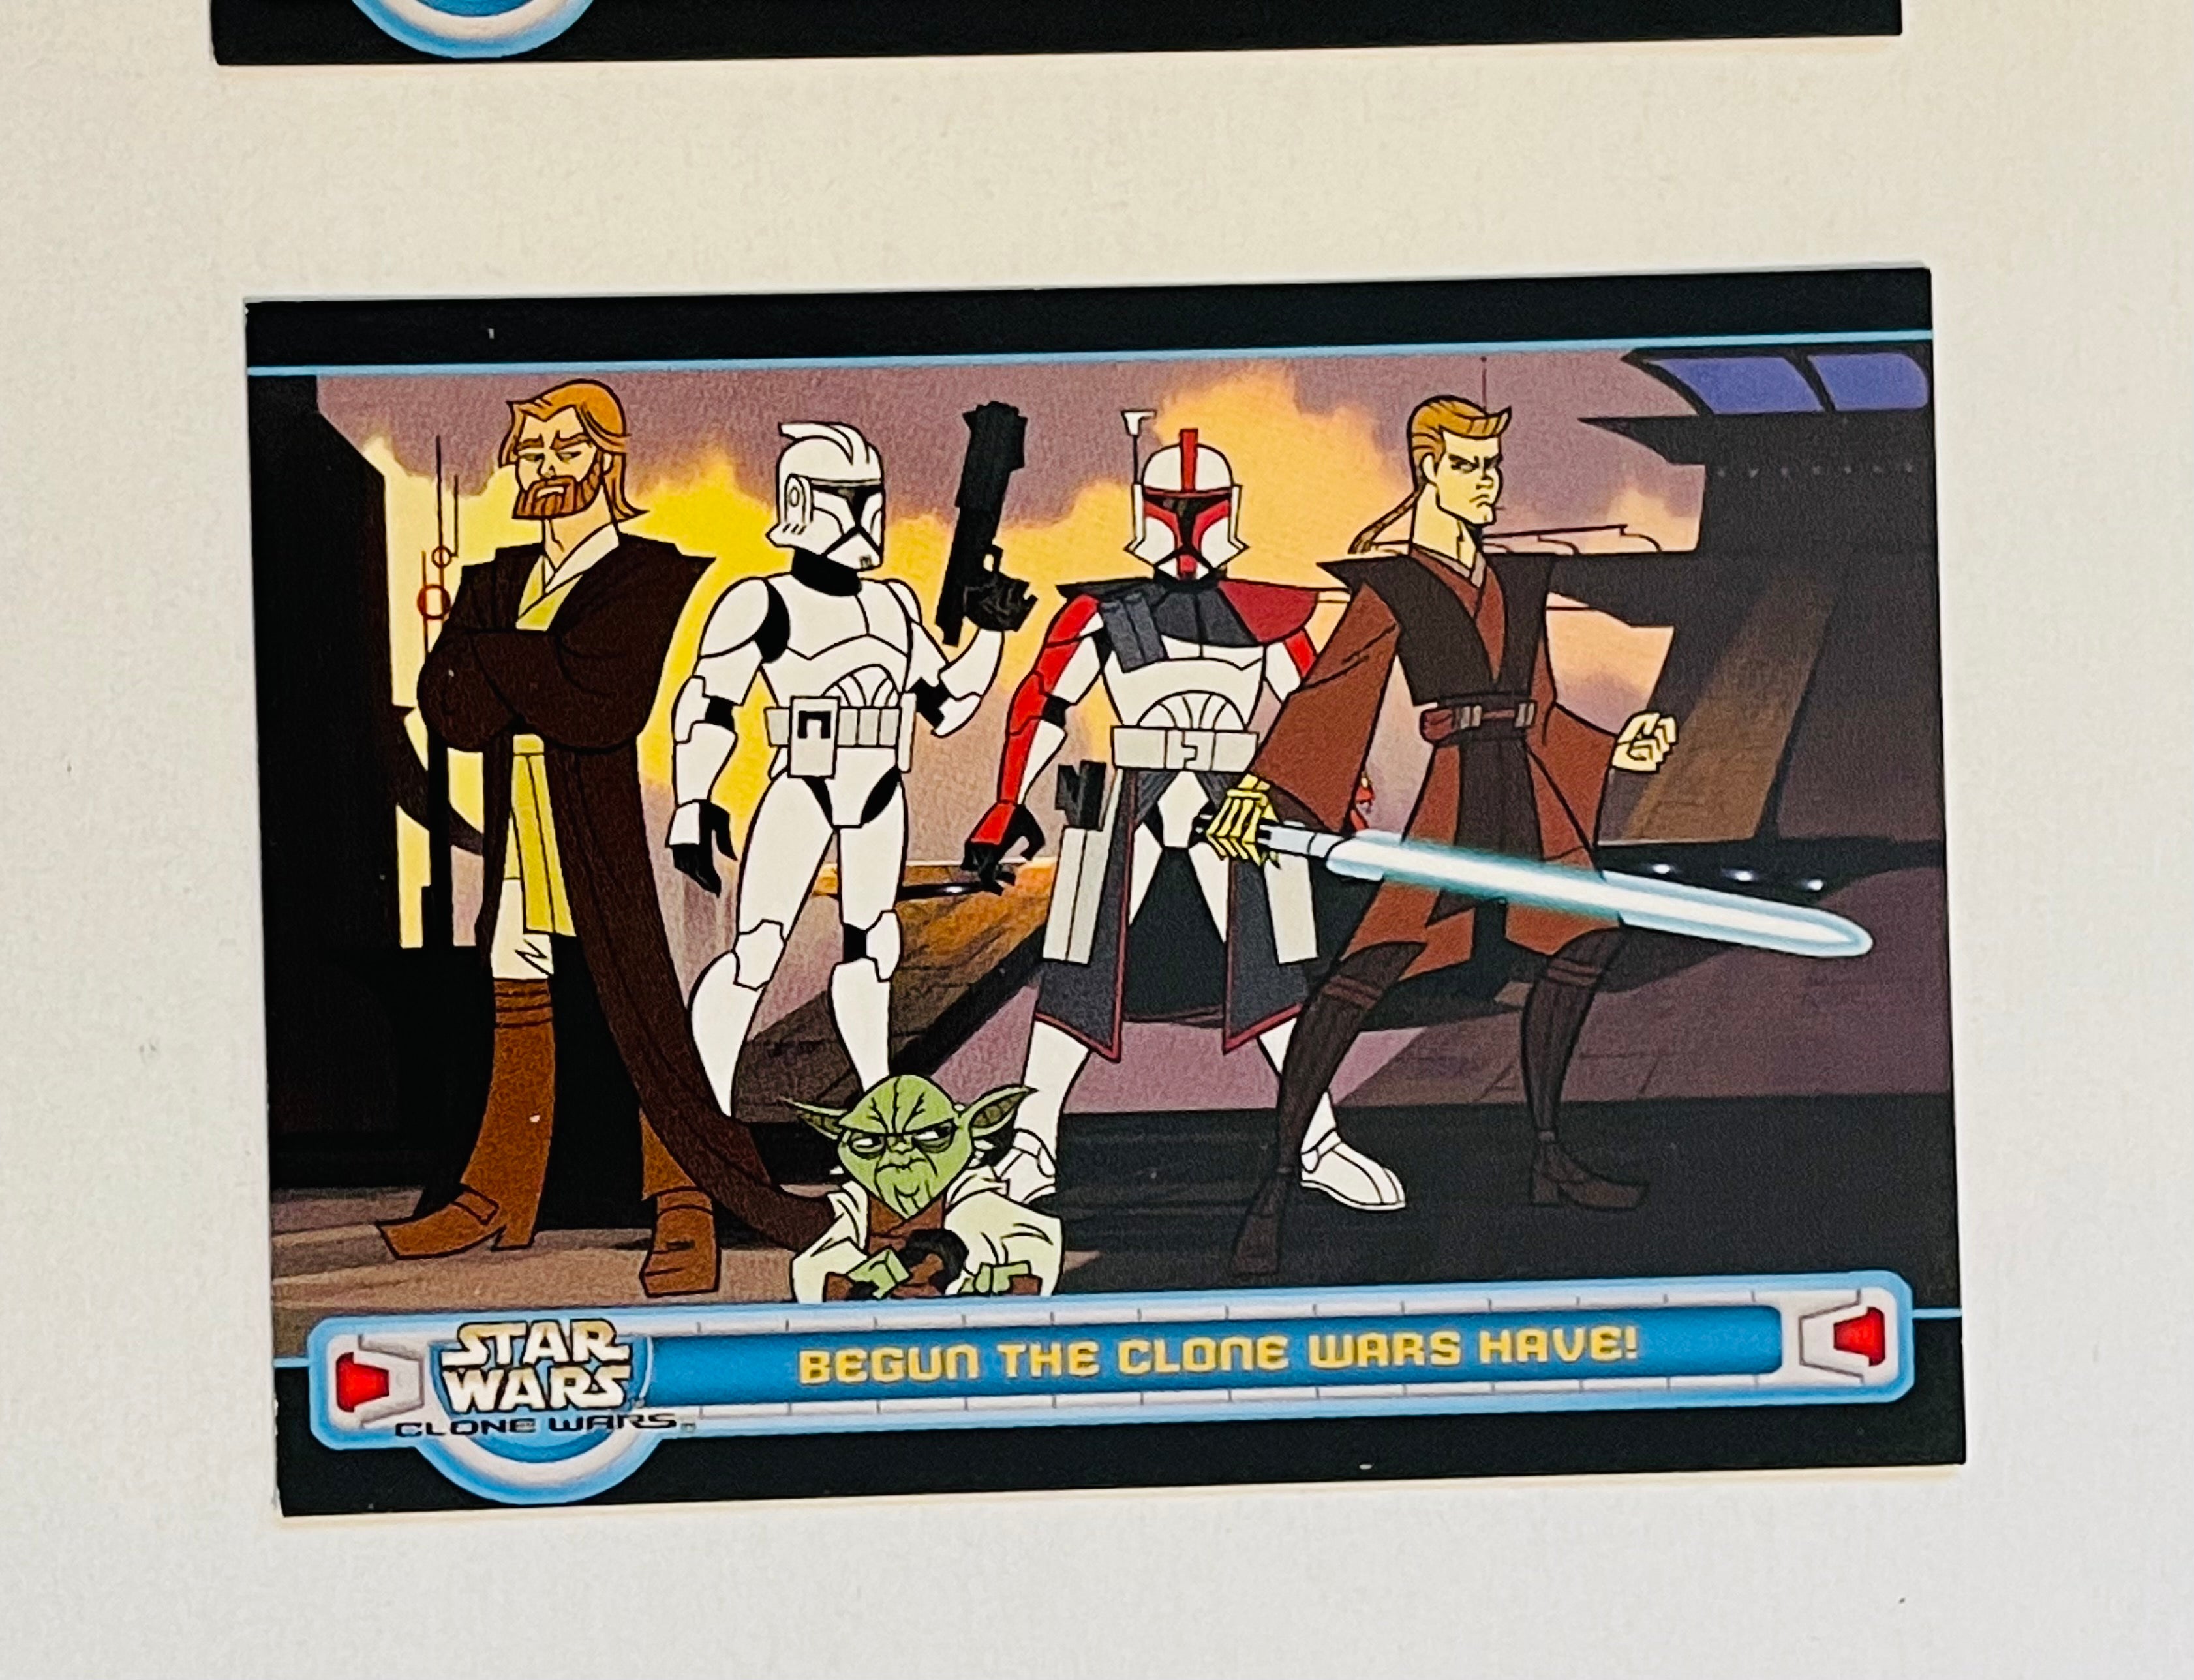 Star Wars Topps Clone Wars two vintage promo cards 2004